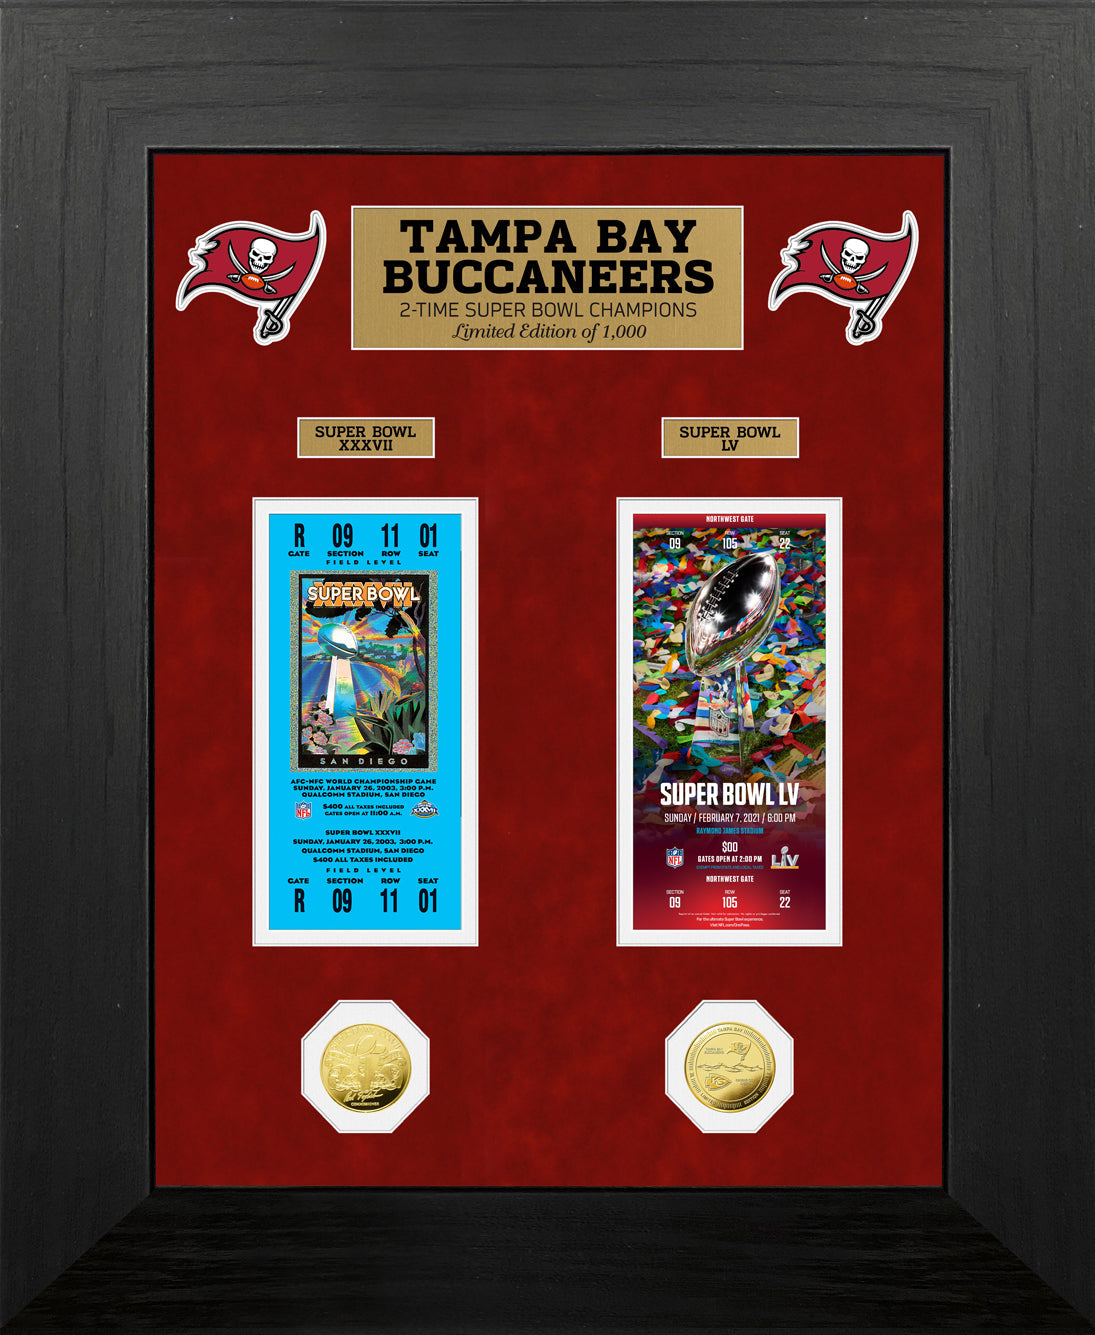 Tampa Bay Buccaneers 2-Time Super Bowl Champions Deluxe Gold Coin & Ticket Collection